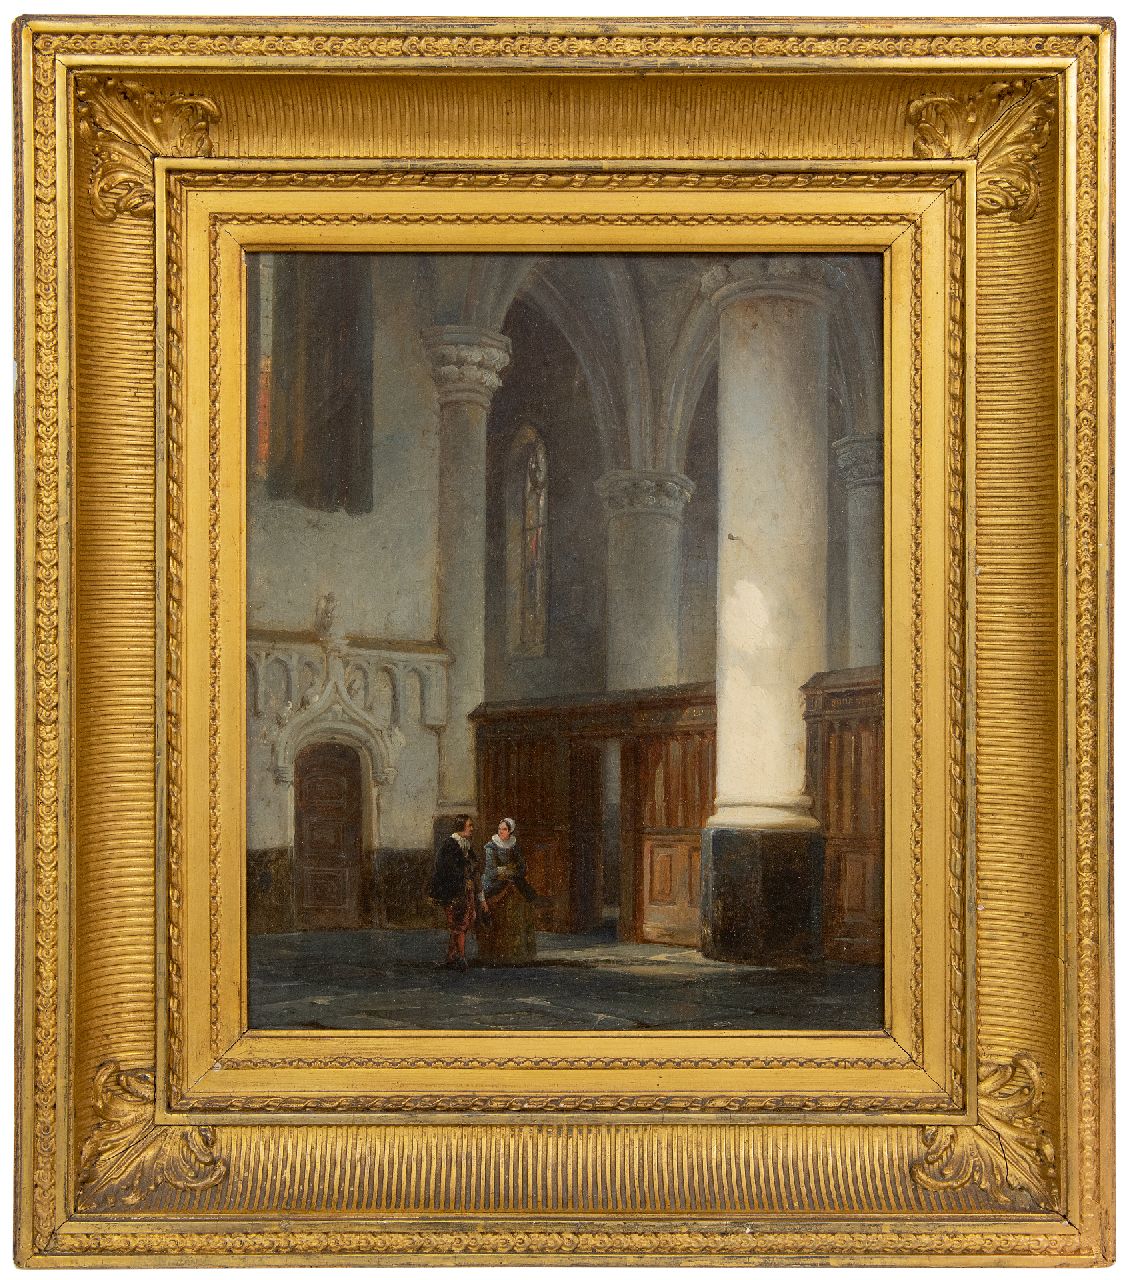 Springer C.  | Cornelis Springer | Paintings offered for sale | Man and woman in church interior, oil on canvas 32.9 x 27.3 cm, signed l.l. with monogram and dated '44